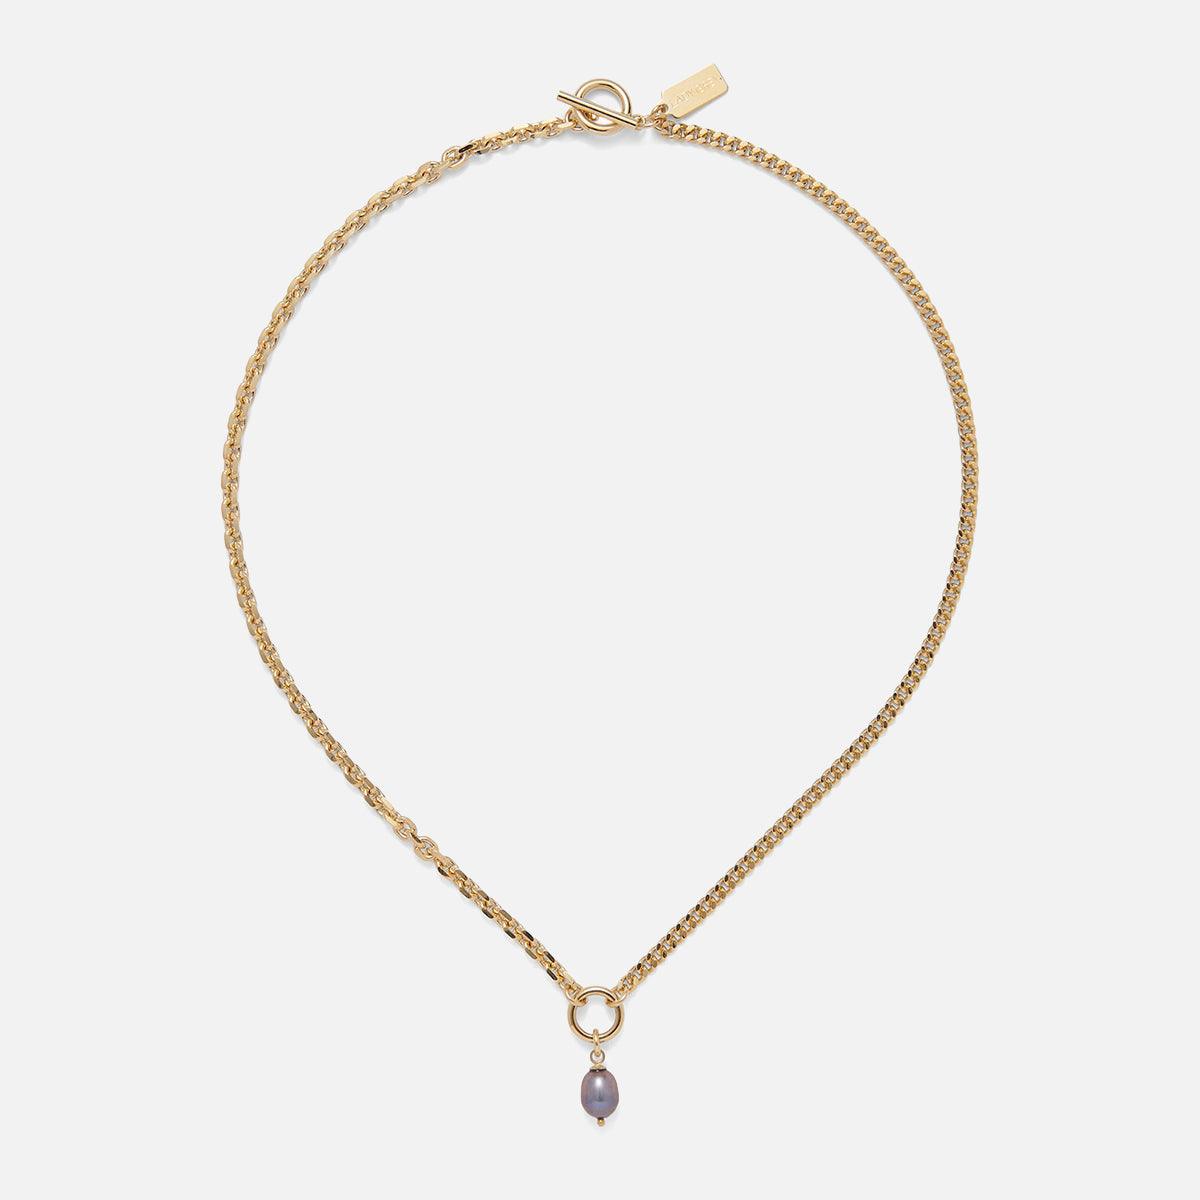 Duo Chain Necklace in Gold - At Present